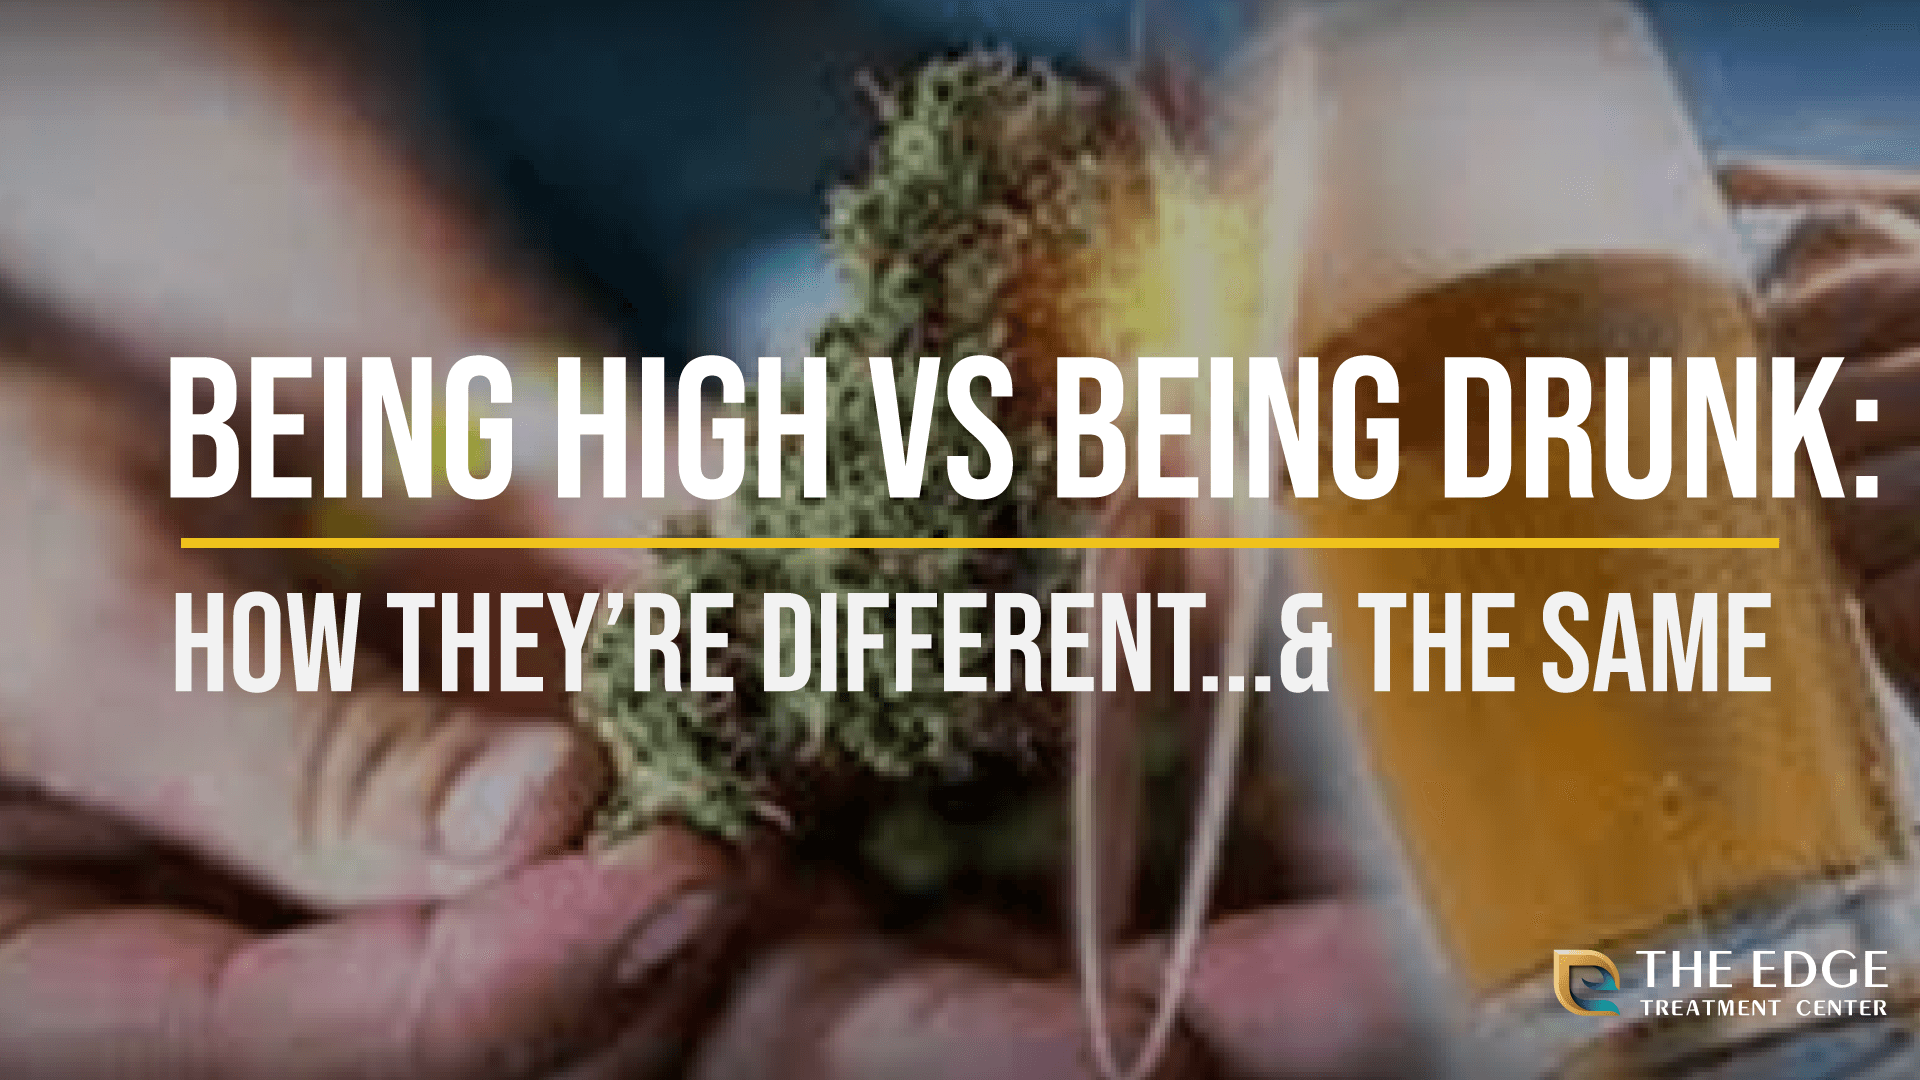 Being High vs Being Drunk: What's the Difference?